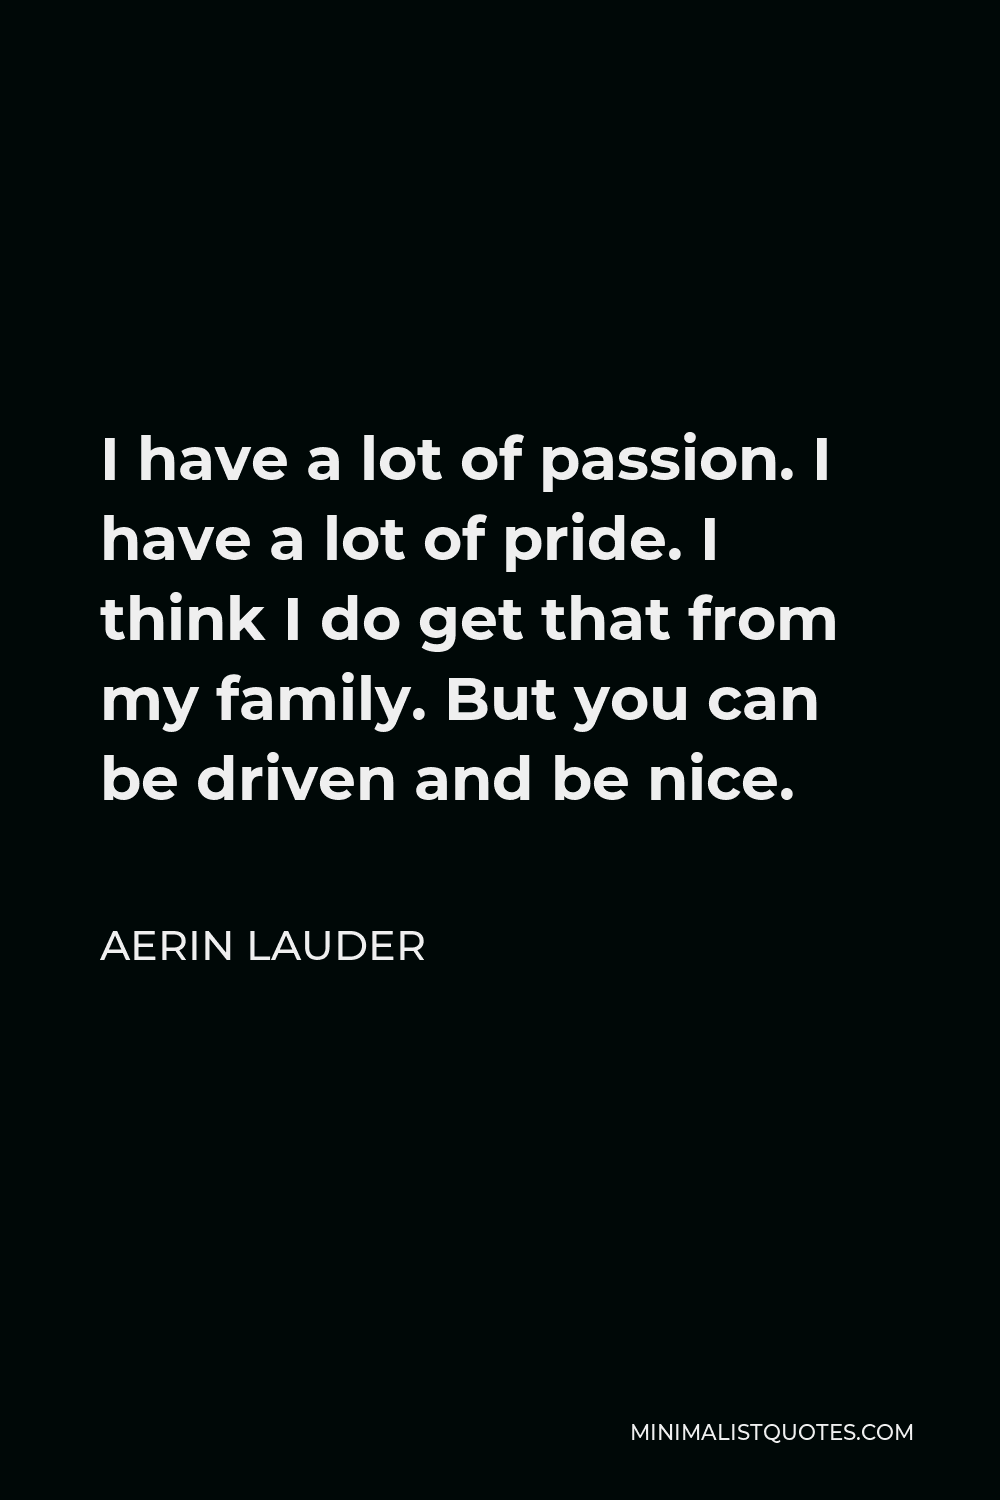 Aerin Lauder Quote - I have a lot of passion. I have a lot of pride. I think I do get that from my family. But you can be driven and be nice.